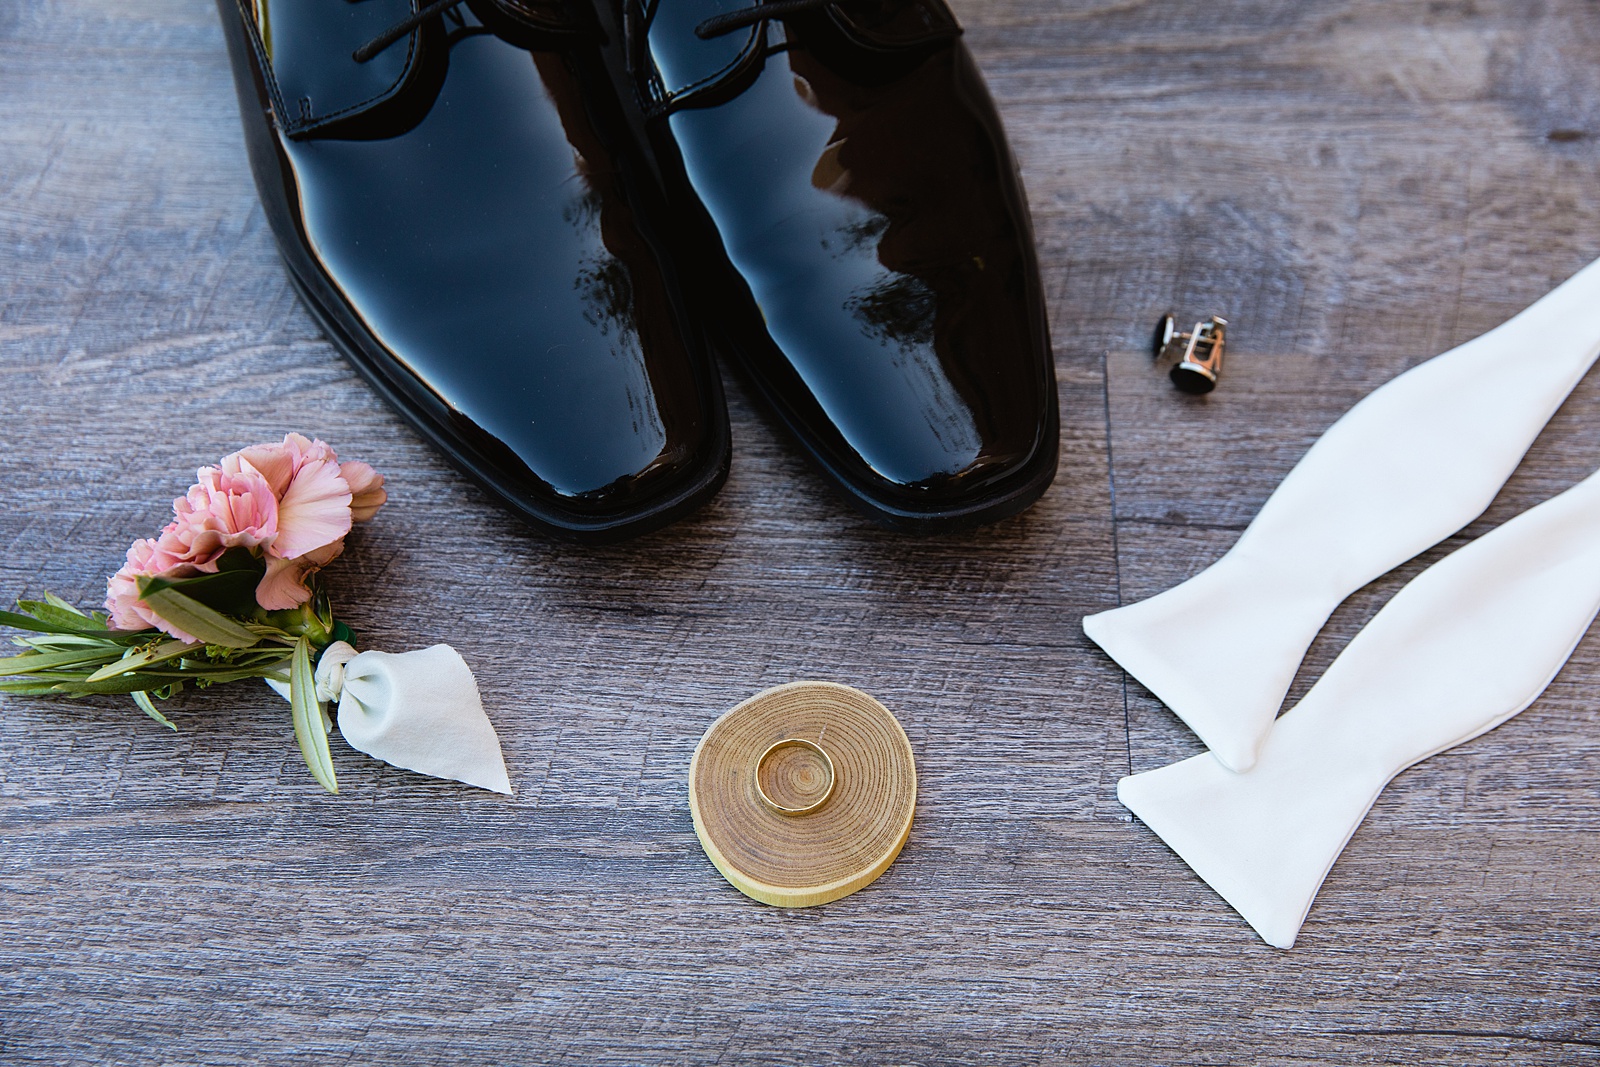 Groom's wedding day details of slick black shoes, boutonniere, cuff link and white tie by PMA Photography.